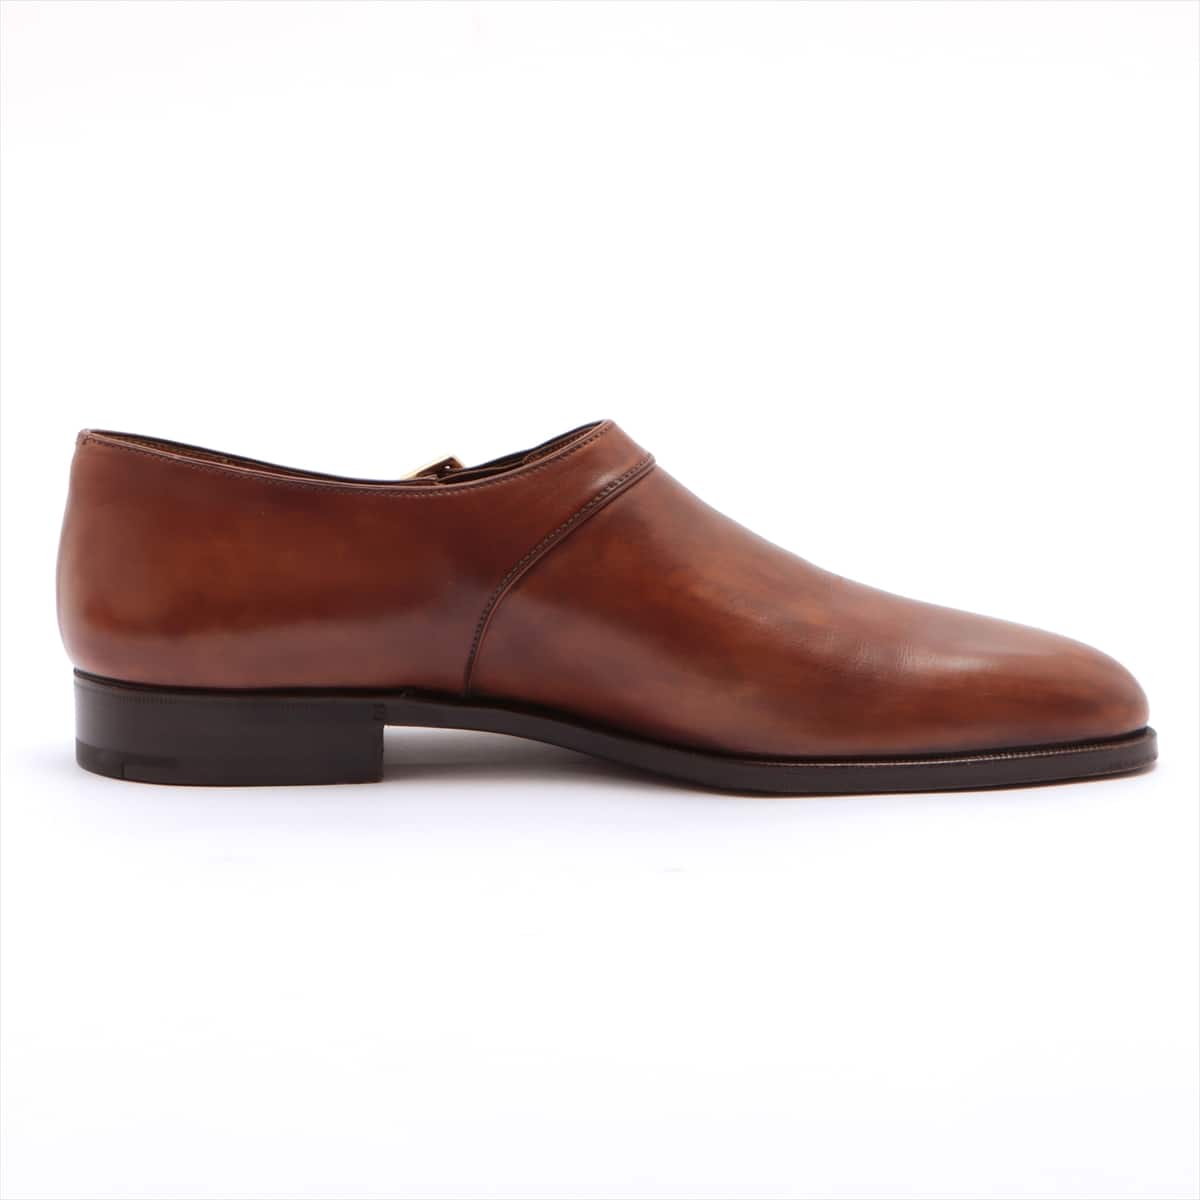 Berluti Leather Leather shoes 9 1/2 Men's Brown single monk Strap 1172 plain toe Comes with a regular shoe keeper